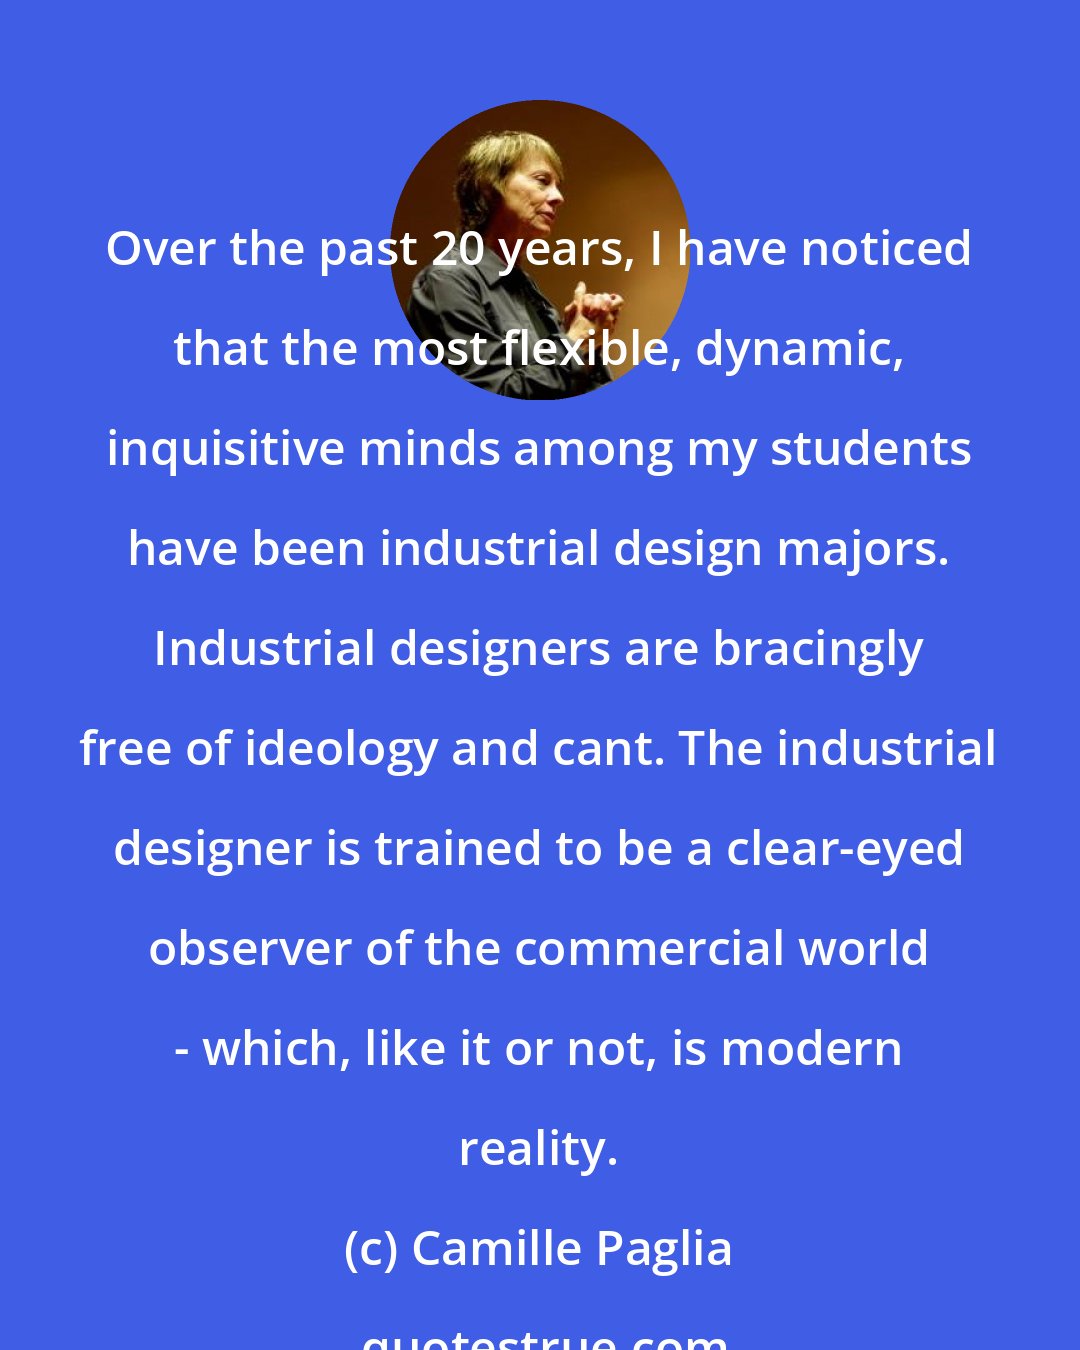 Camille Paglia: Over the past 20 years, I have noticed that the most flexible, dynamic, inquisitive minds among my students have been industrial design majors. Industrial designers are bracingly free of ideology and cant. The industrial designer is trained to be a clear-eyed observer of the commercial world - which, like it or not, is modern reality.